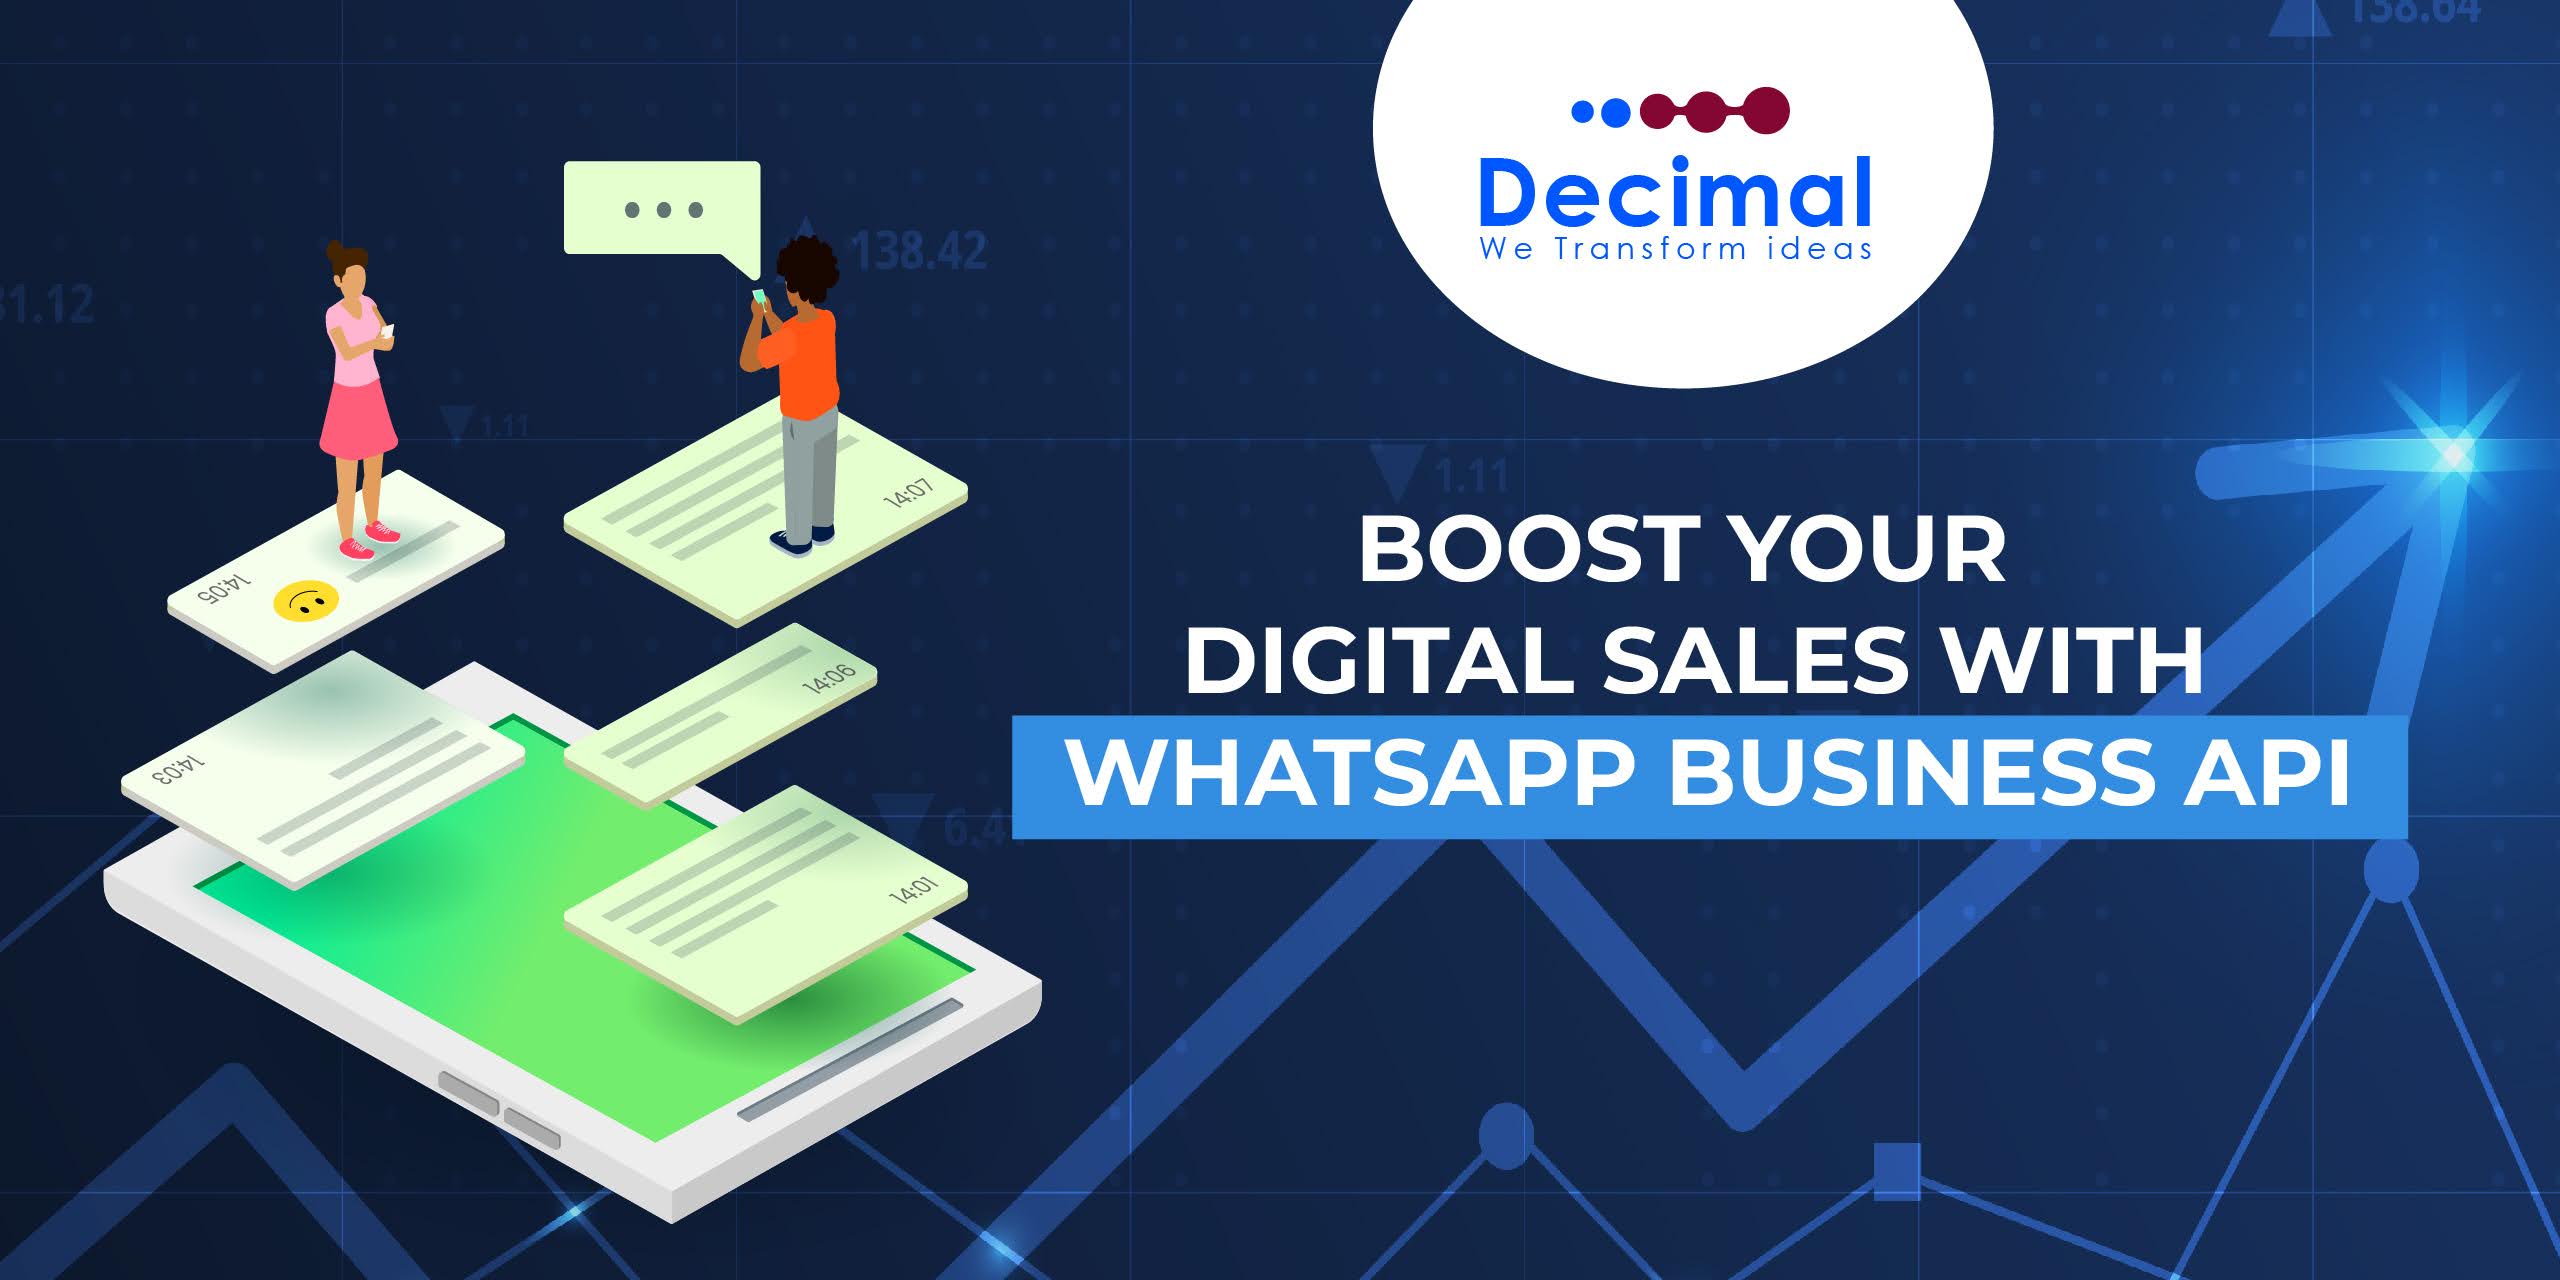 Boost Your Digital Sales With Whatsapp Business API